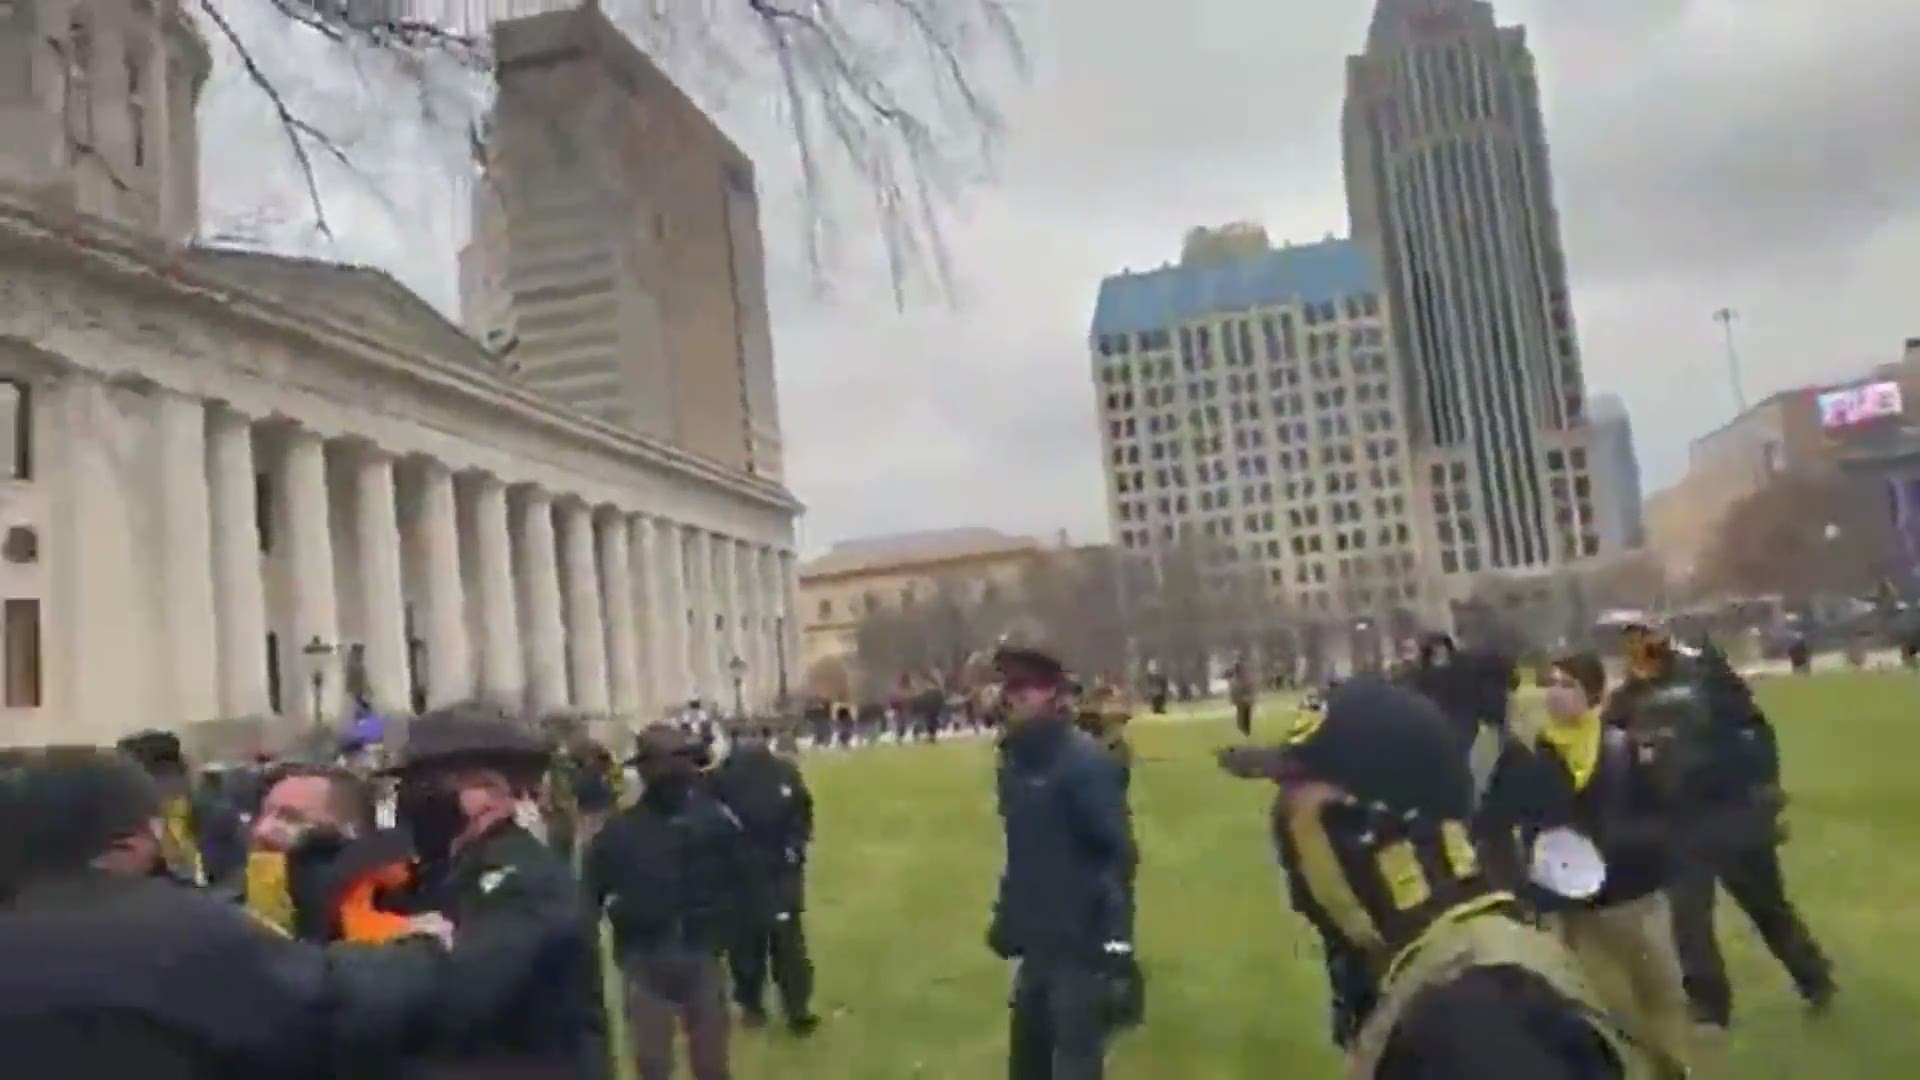 On Wednesday afternoon, clashes broke out on the Ohio Statehouse lawn between supporters of President Trump and his opponents.